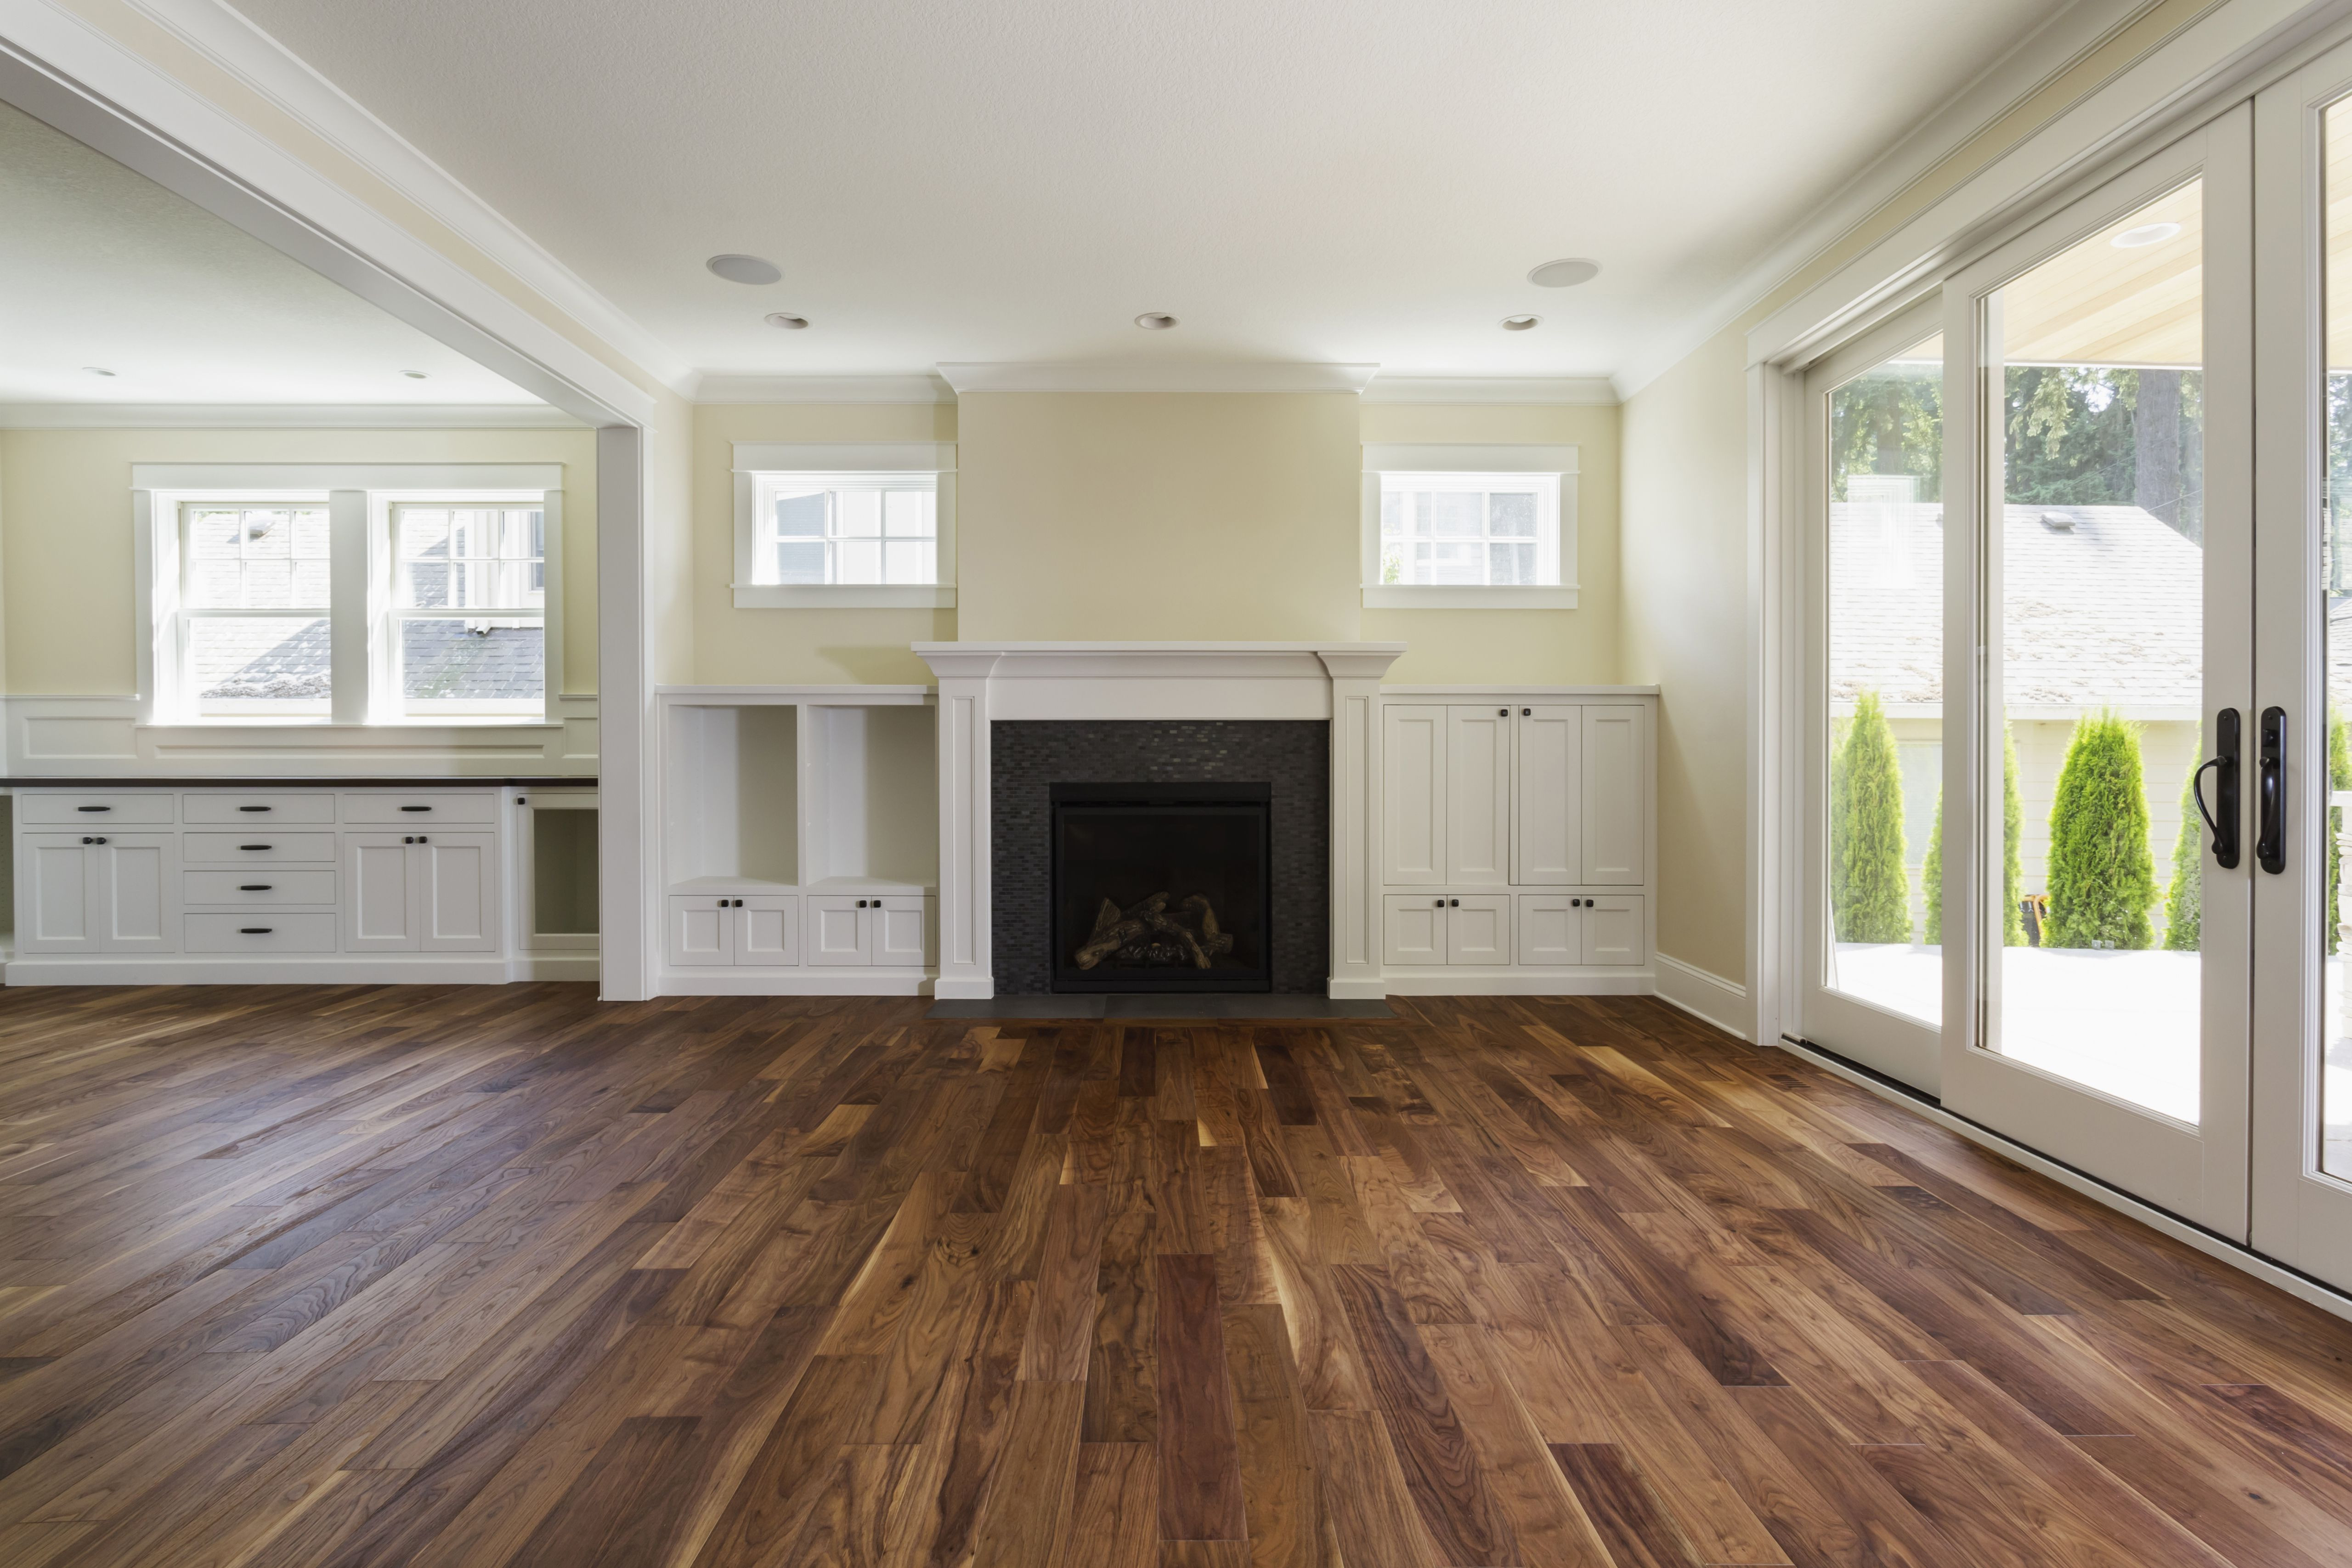 26 Perfect Hardwood Floor Refinishing Vs Replacing 2024 free download hardwood floor refinishing vs replacing of the pros and cons of prefinished hardwood flooring for fireplace and built in shelves in living room 482143011 57bef8e33df78cc16e035397